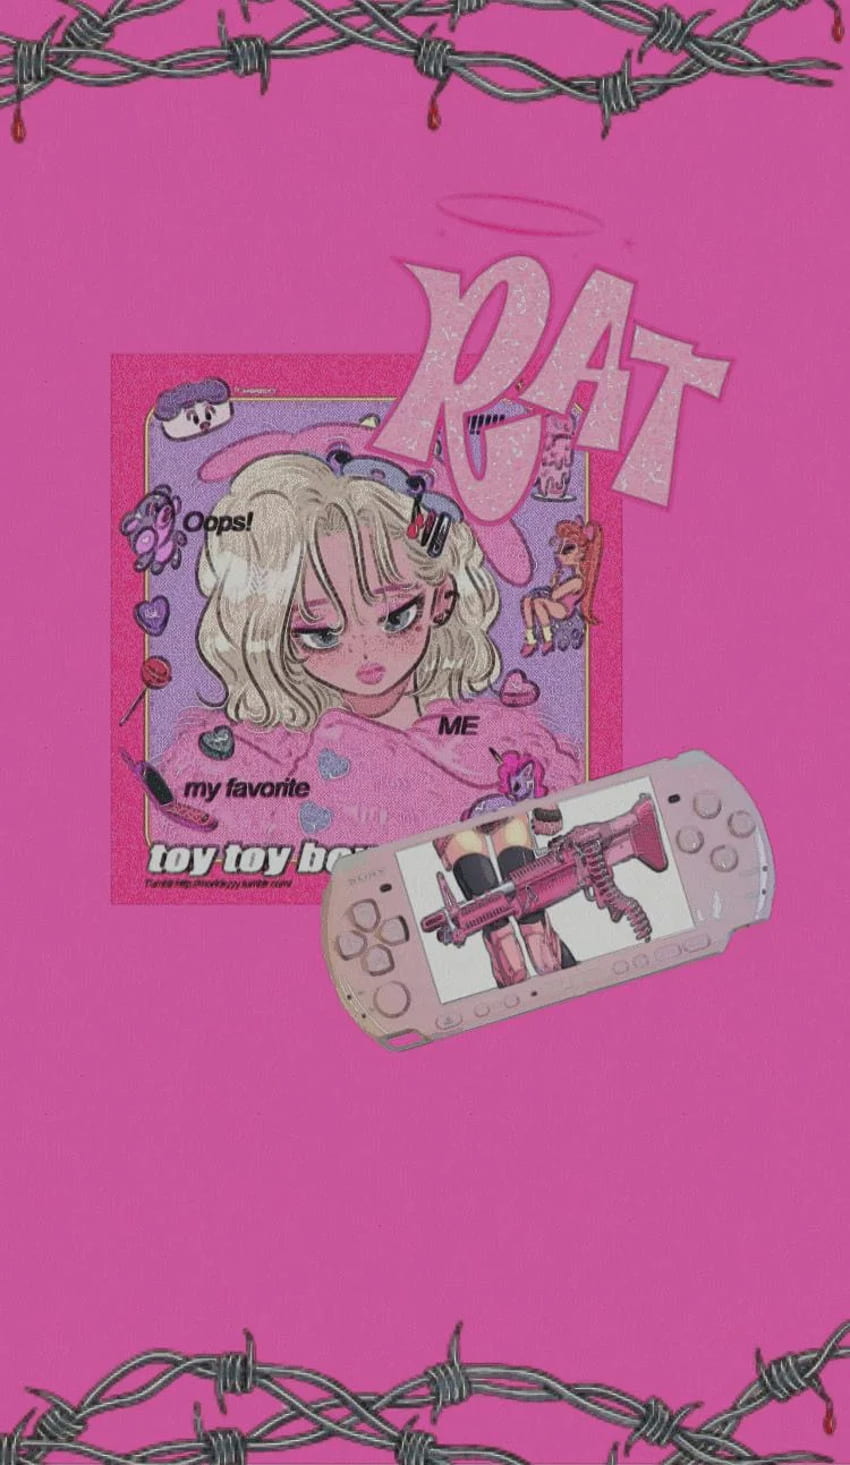 Pink aesthetic phone background with anime girl and barbed wire - Kidcore